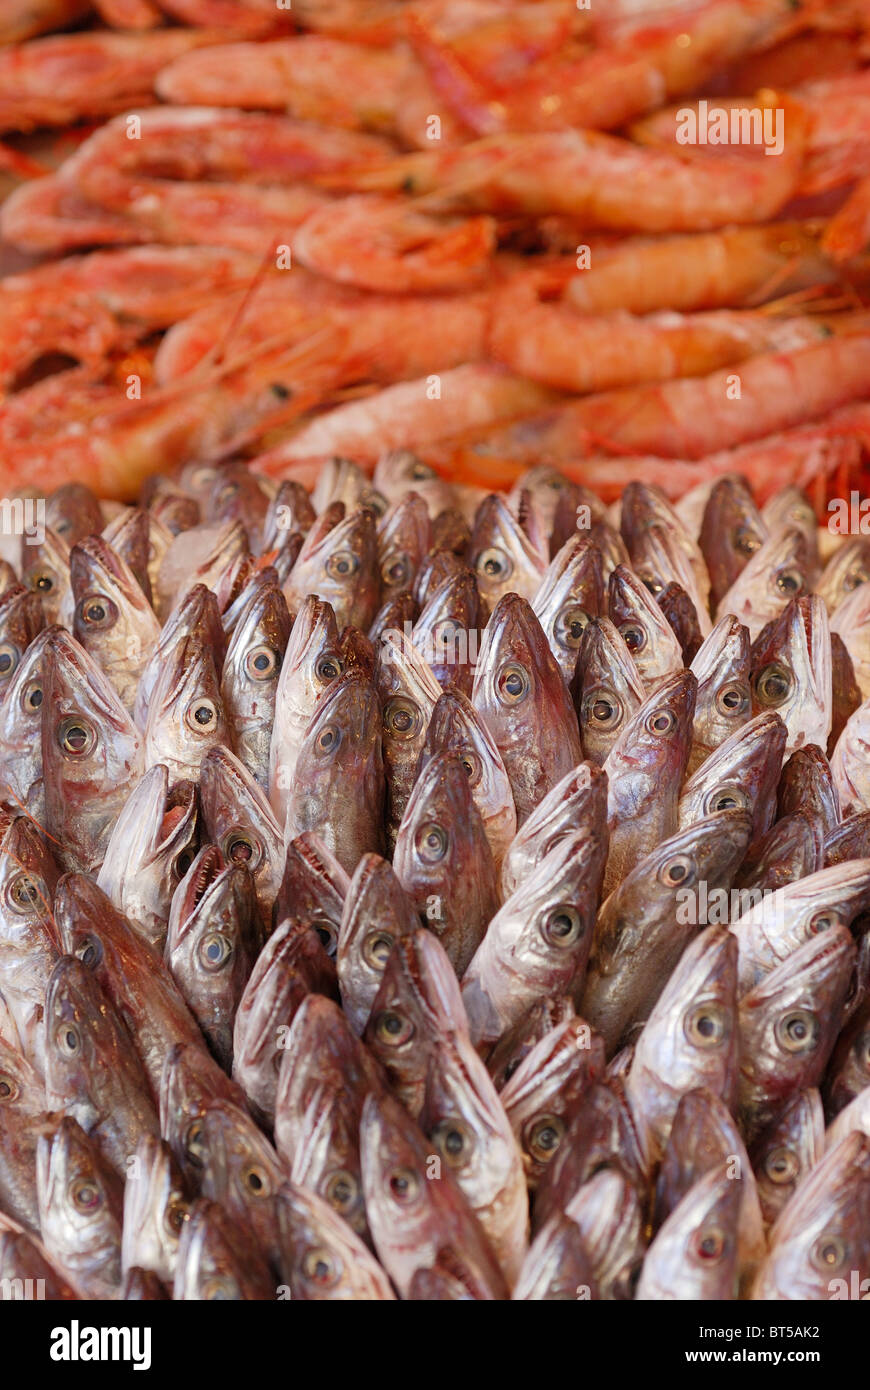 Siracusa. Sicily. Italy. Display of small fish & prawns at the fish market on Ortygia. Stock Photo